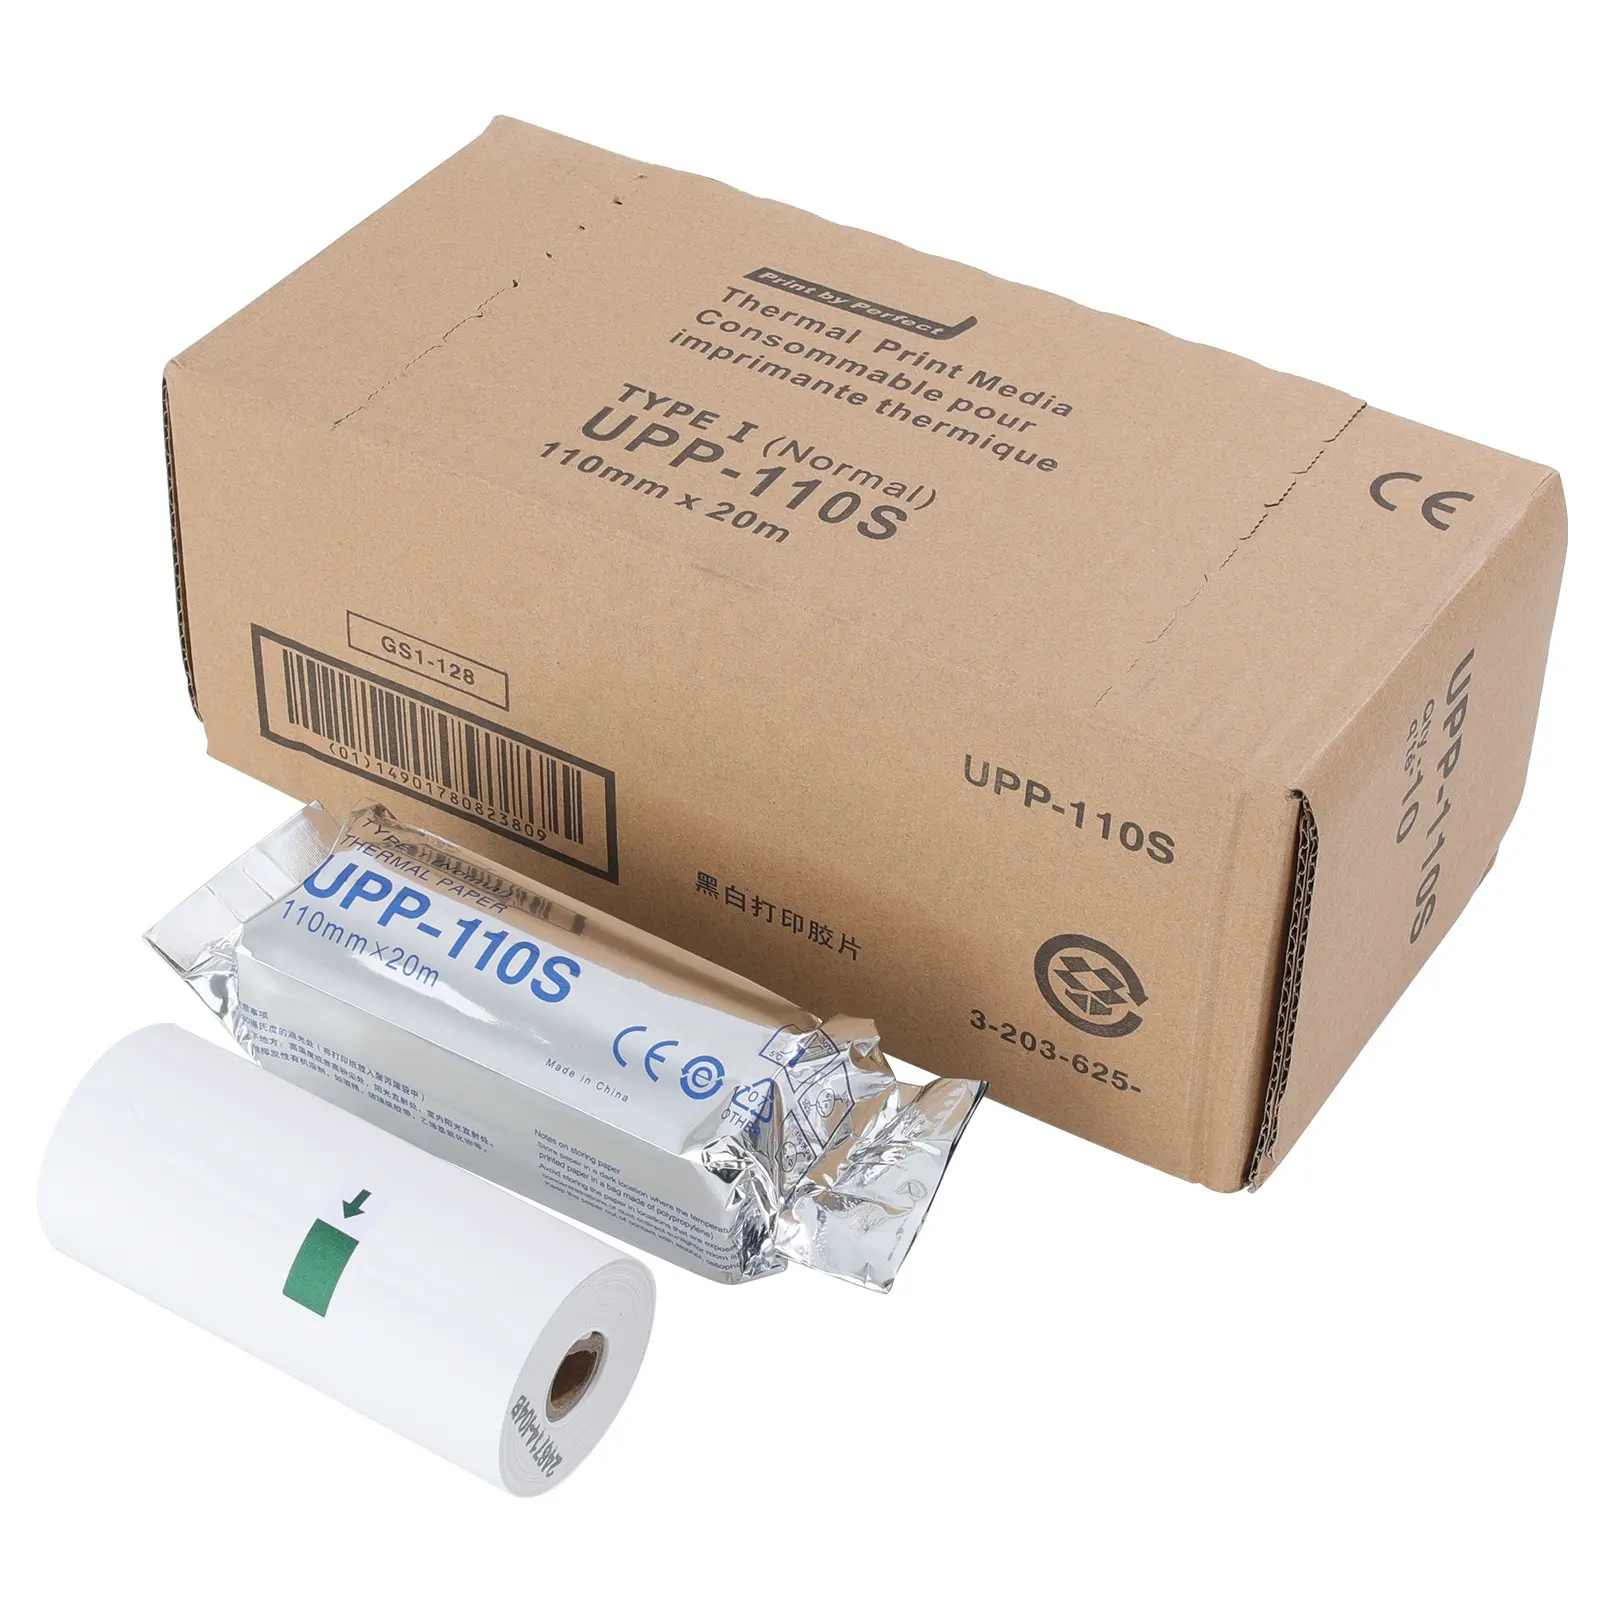 Medical Consumables UPP-110S UPP-110HG Ultrasound Thermal Paper Roll